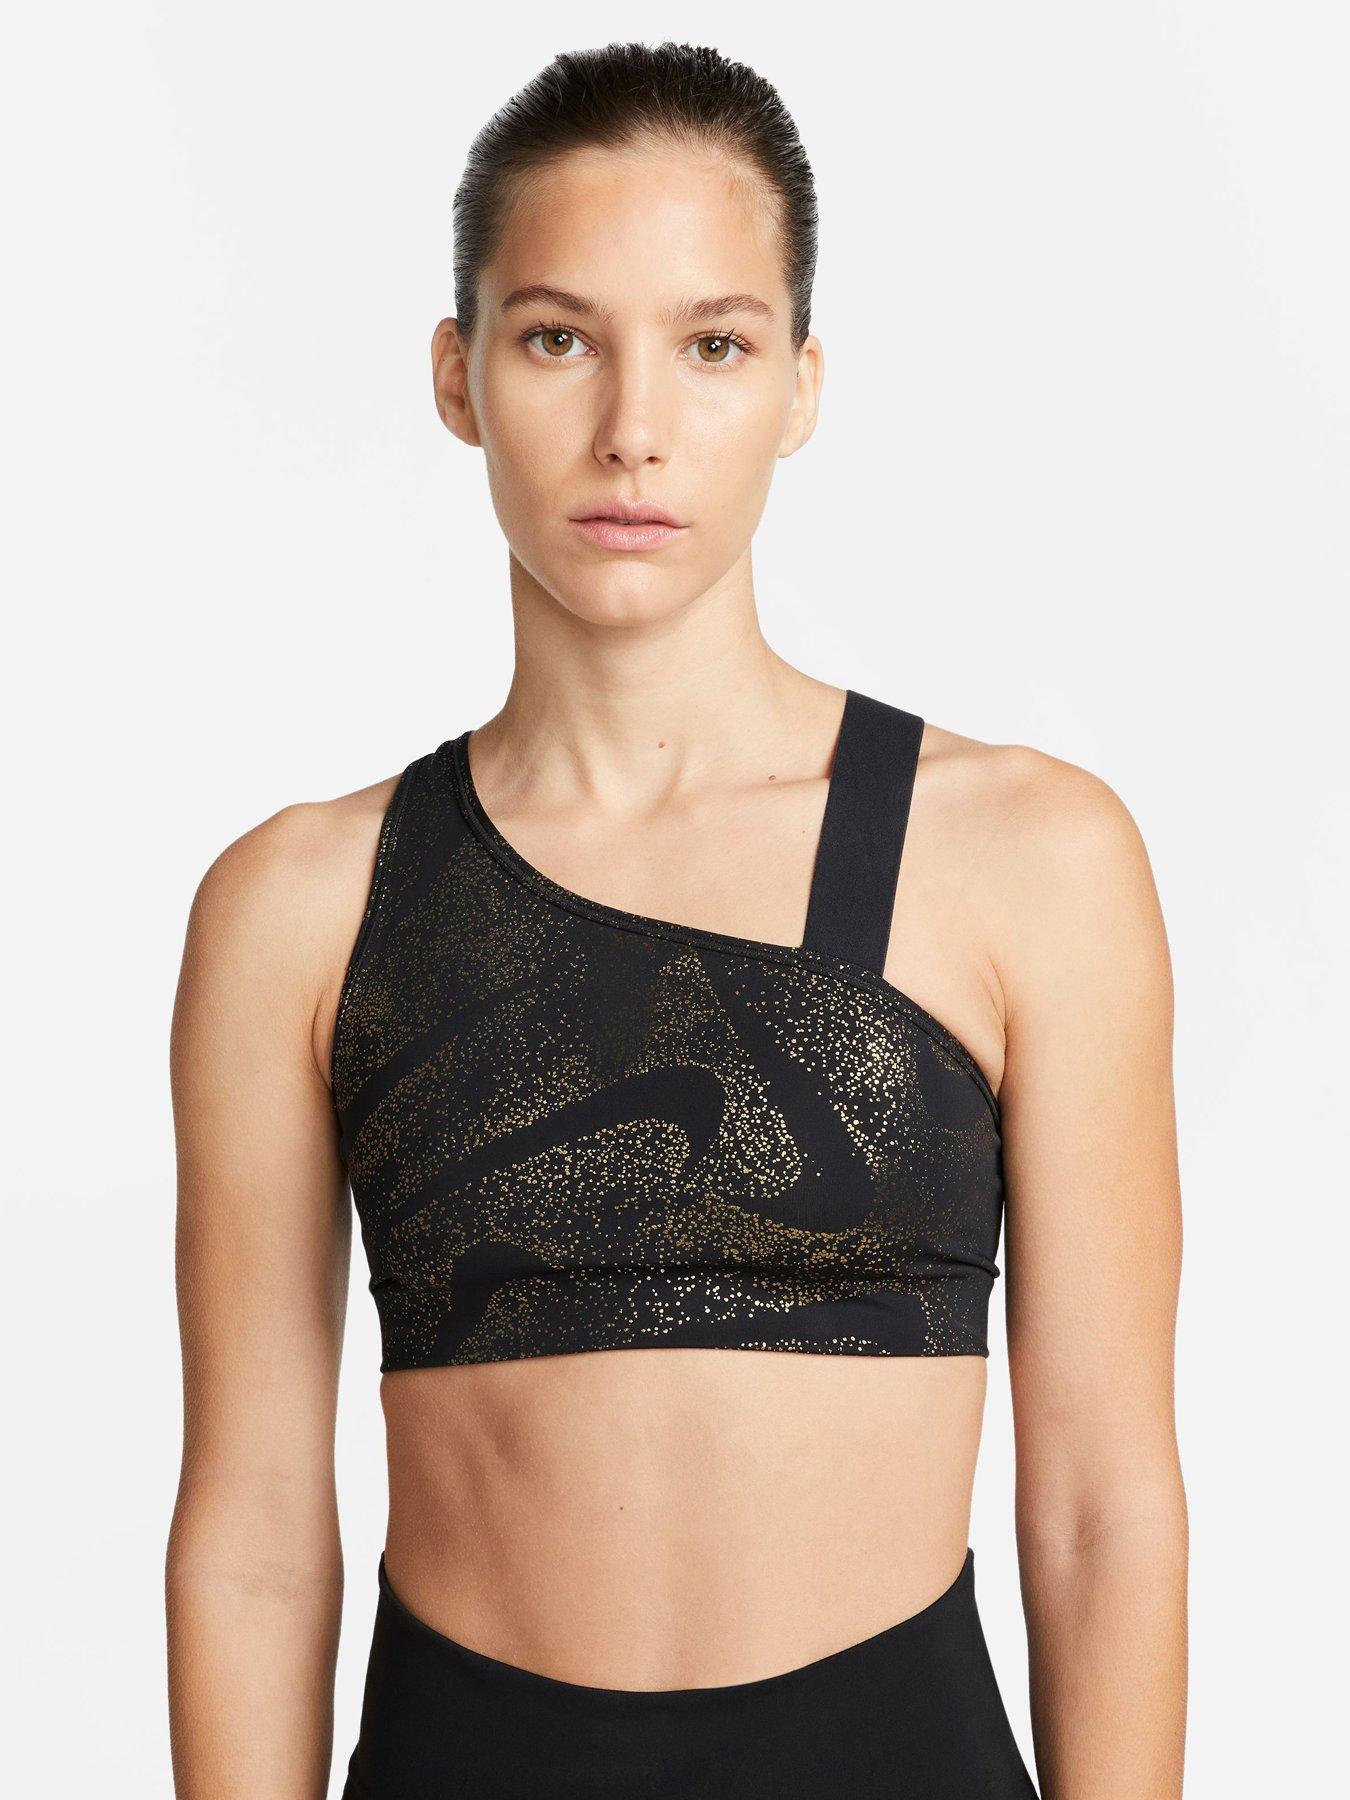 Nike One Training Plus Indy dri fit light support sports bra in brown  leopard